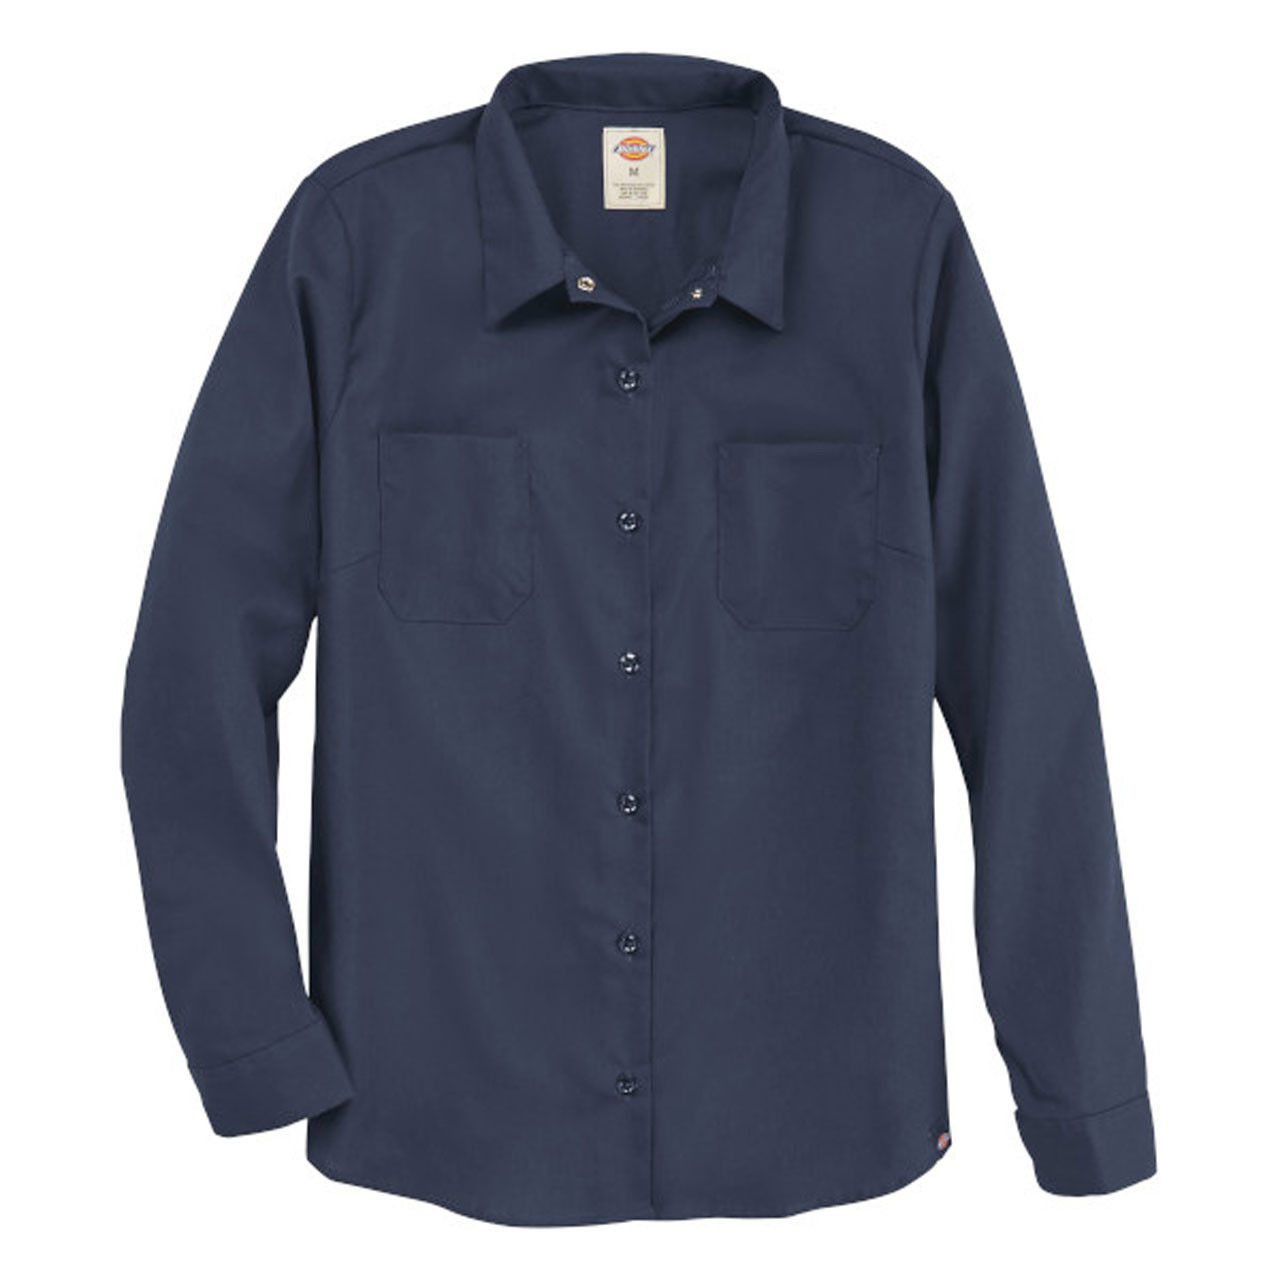 Can dickie long sleeve work shirts be used for a wide variety of jobs?